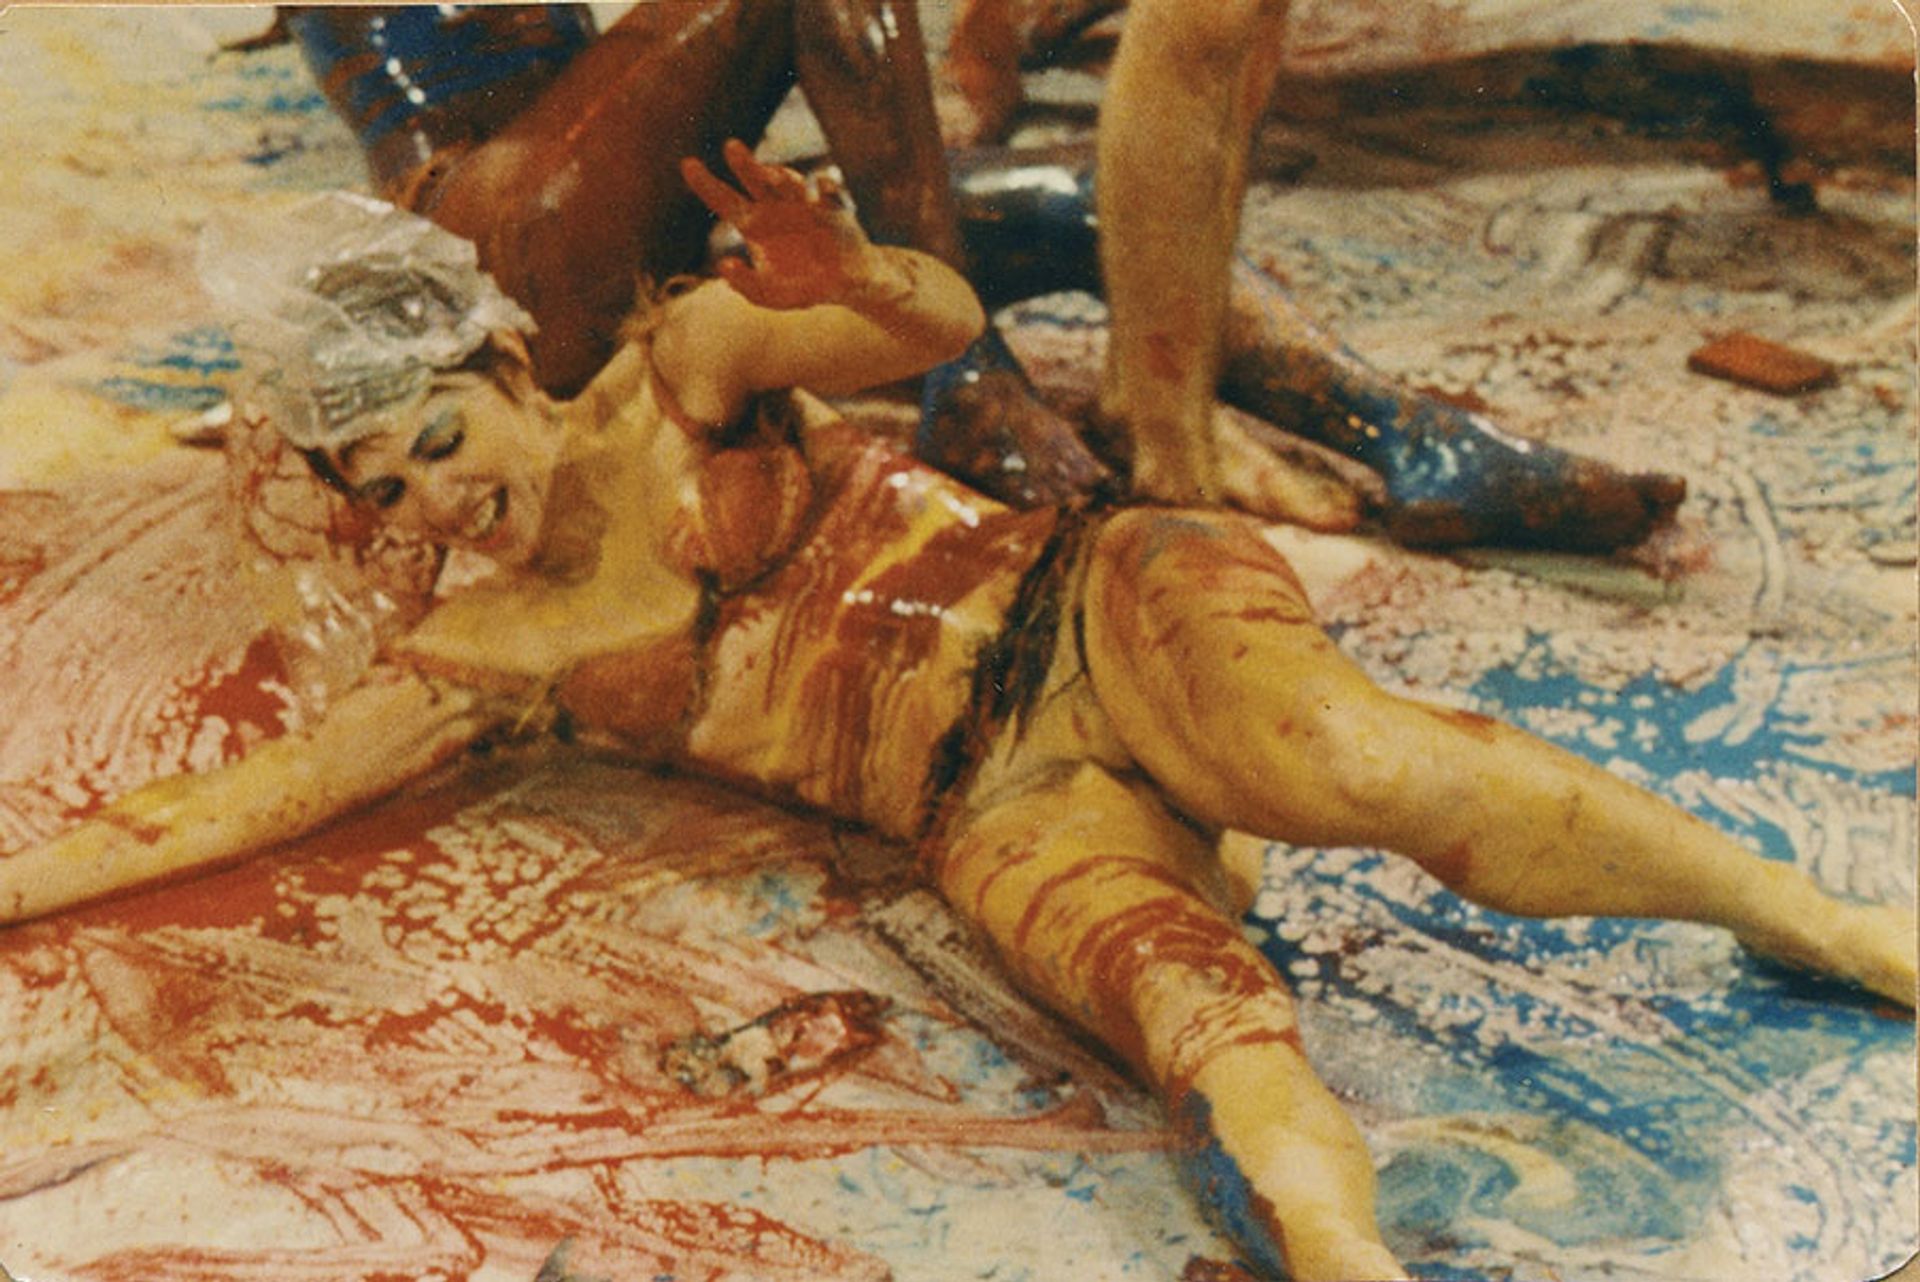 The body as canvas: Schneemann’s Meat Joy (1964) involved performers skidding, rolling and twisting in paper, paint and raw meat

Photo © Estate of Robert McElroy/Licensed by VAGA/ARS



